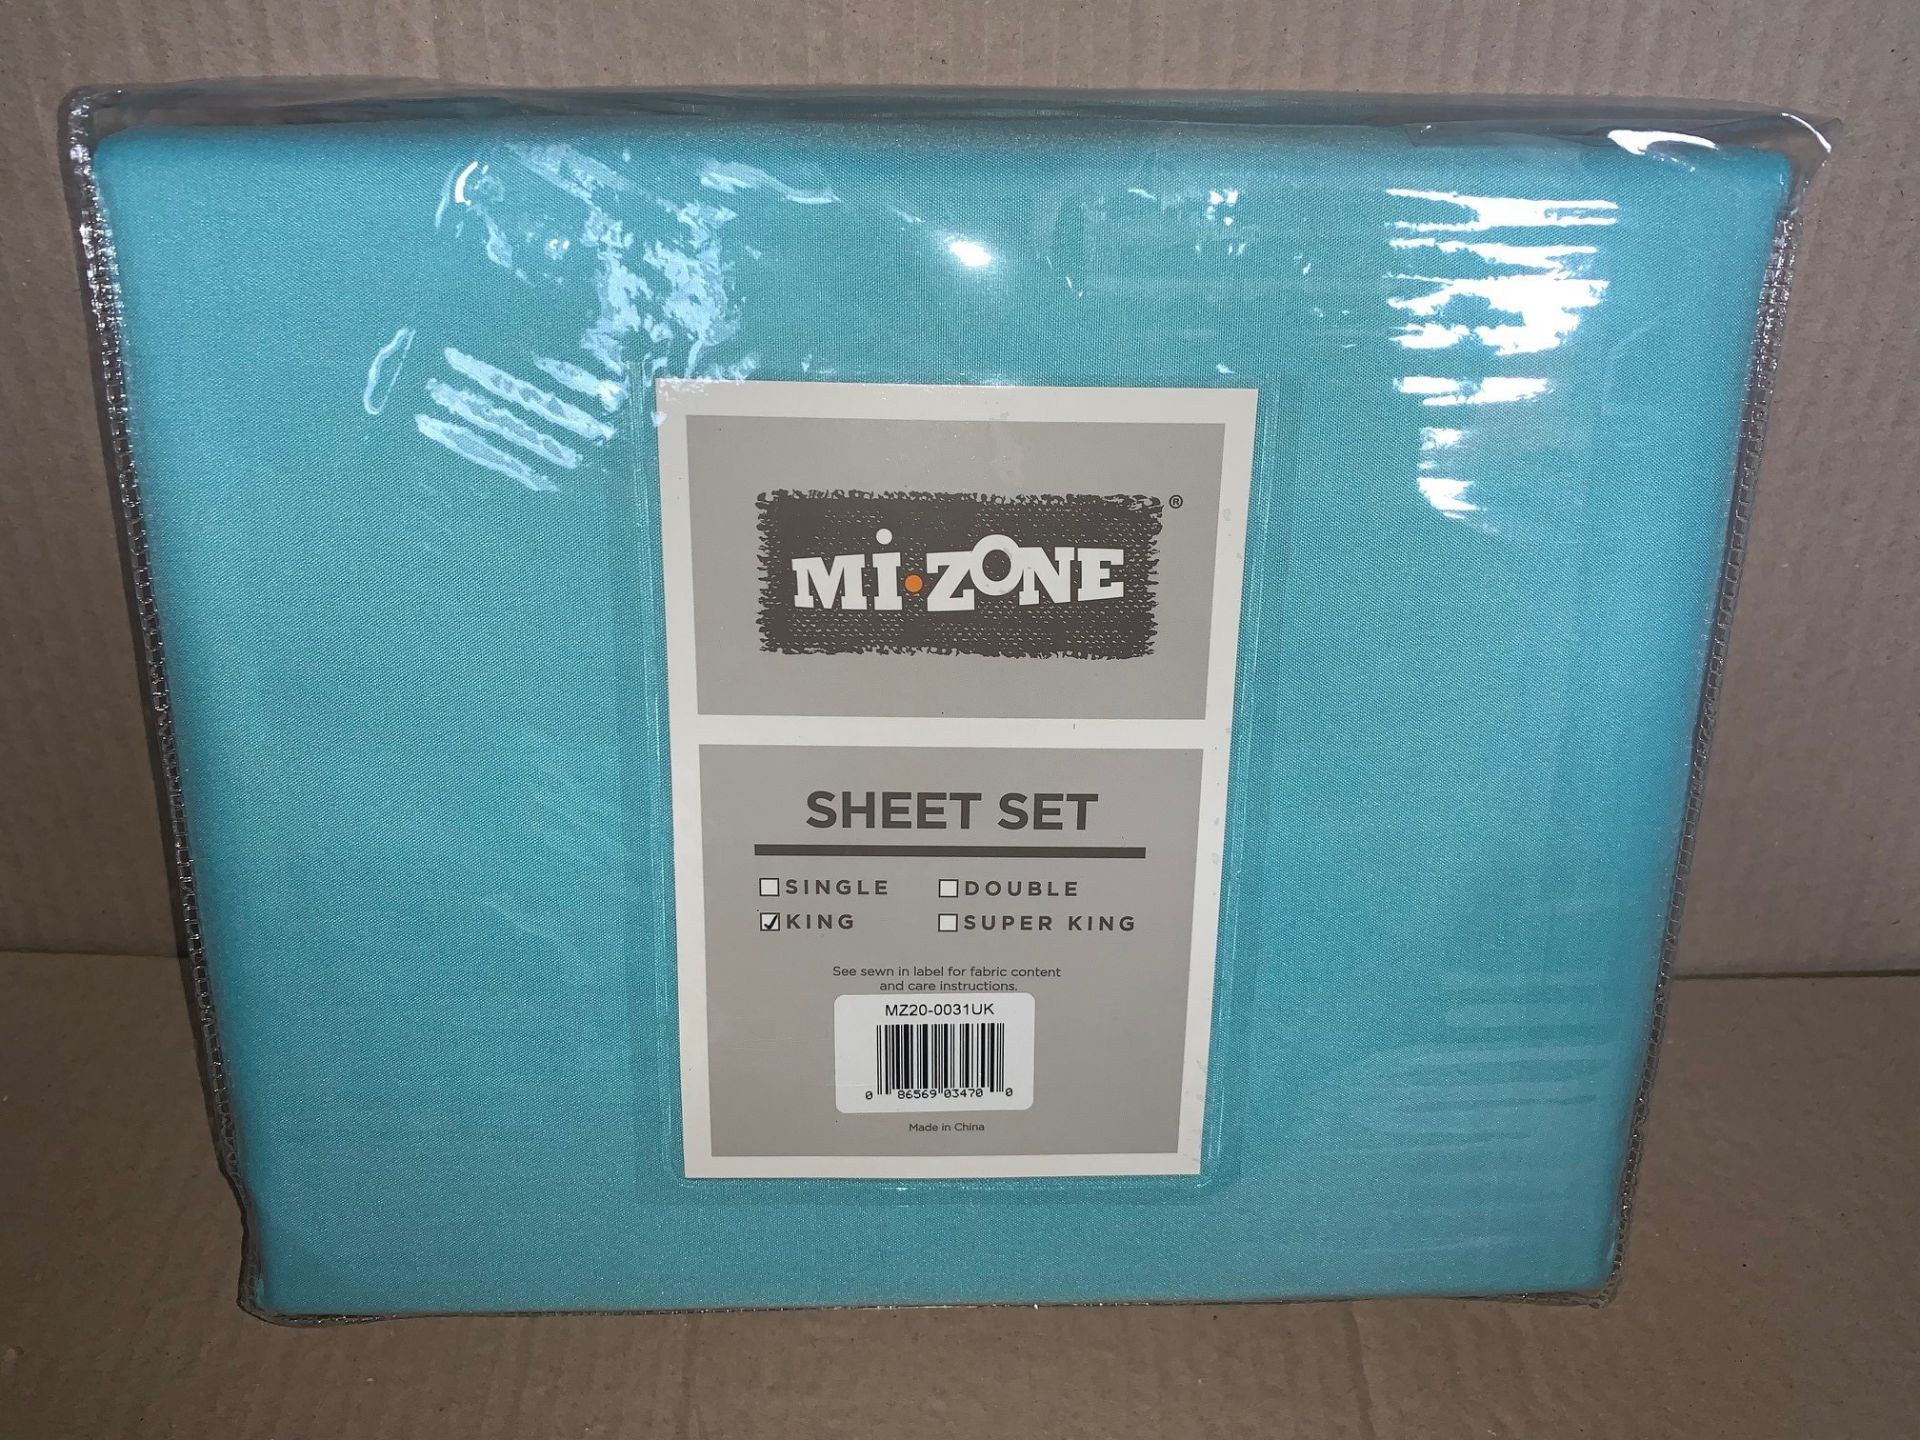 2 x Mi-Zone King Size Sheet Sets Teal - Includes Fitted Sheet, Flat Sheet and Pillowcases -